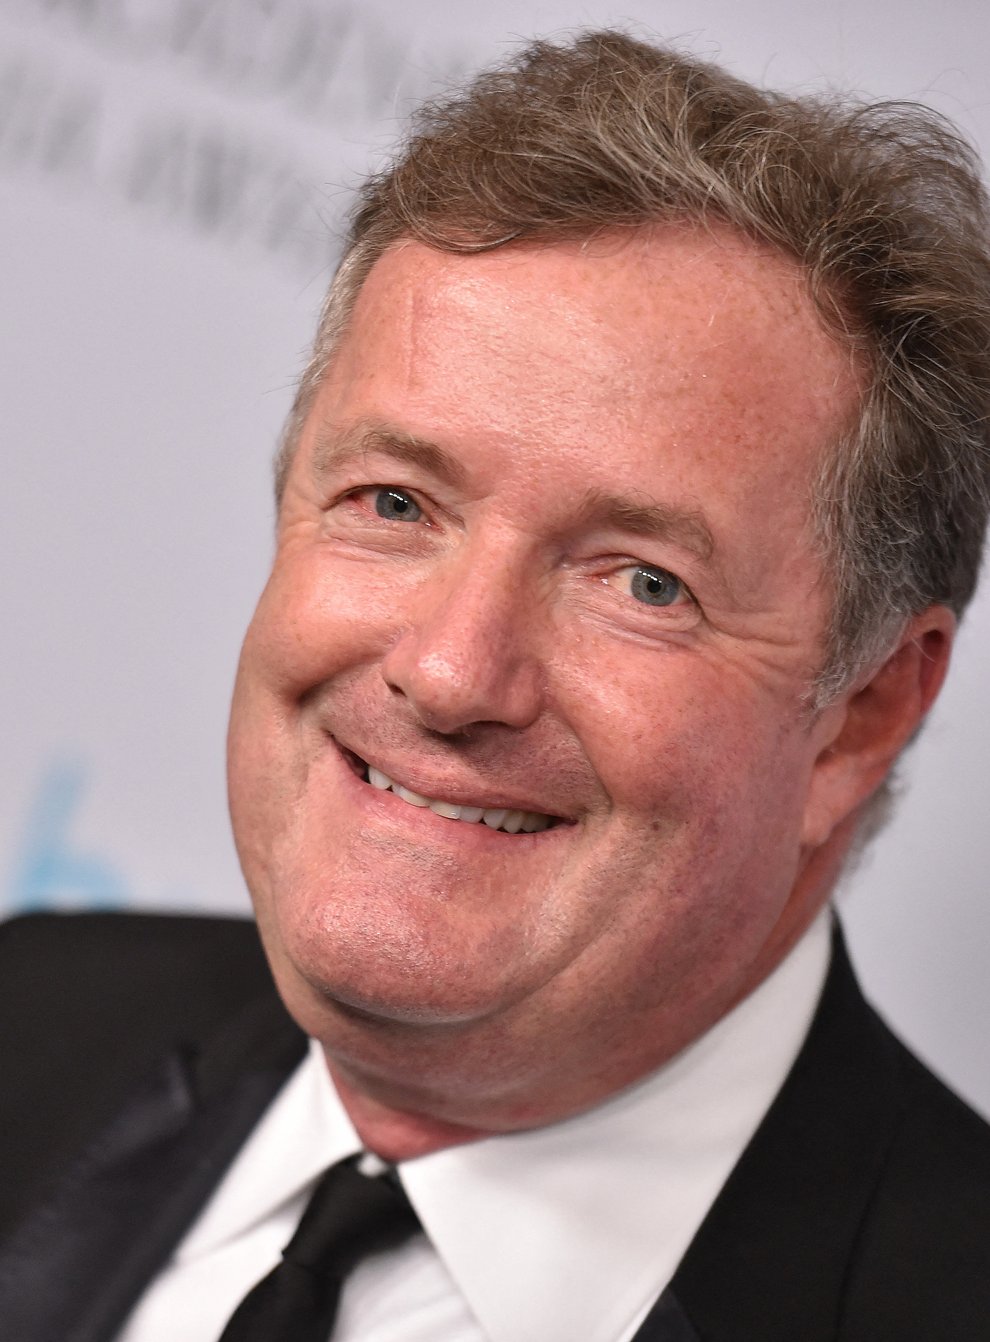 Piers Morgan has confirmed all Cabinet members backing Cummings will not be allowed on Good Morning Britain